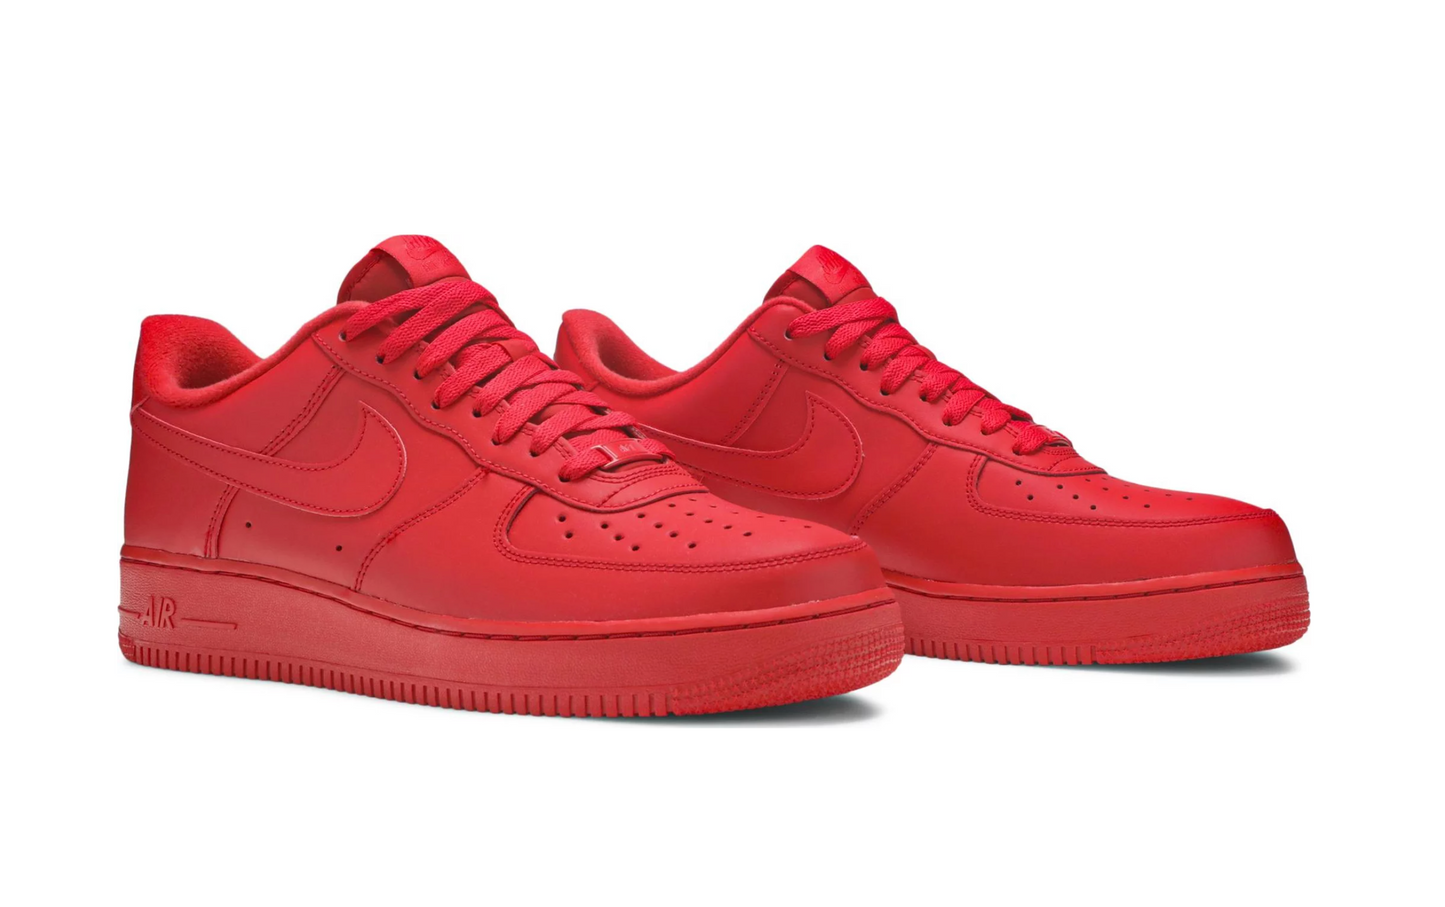 Air Force 1 Low '07 LV8 1 'Triple Red'